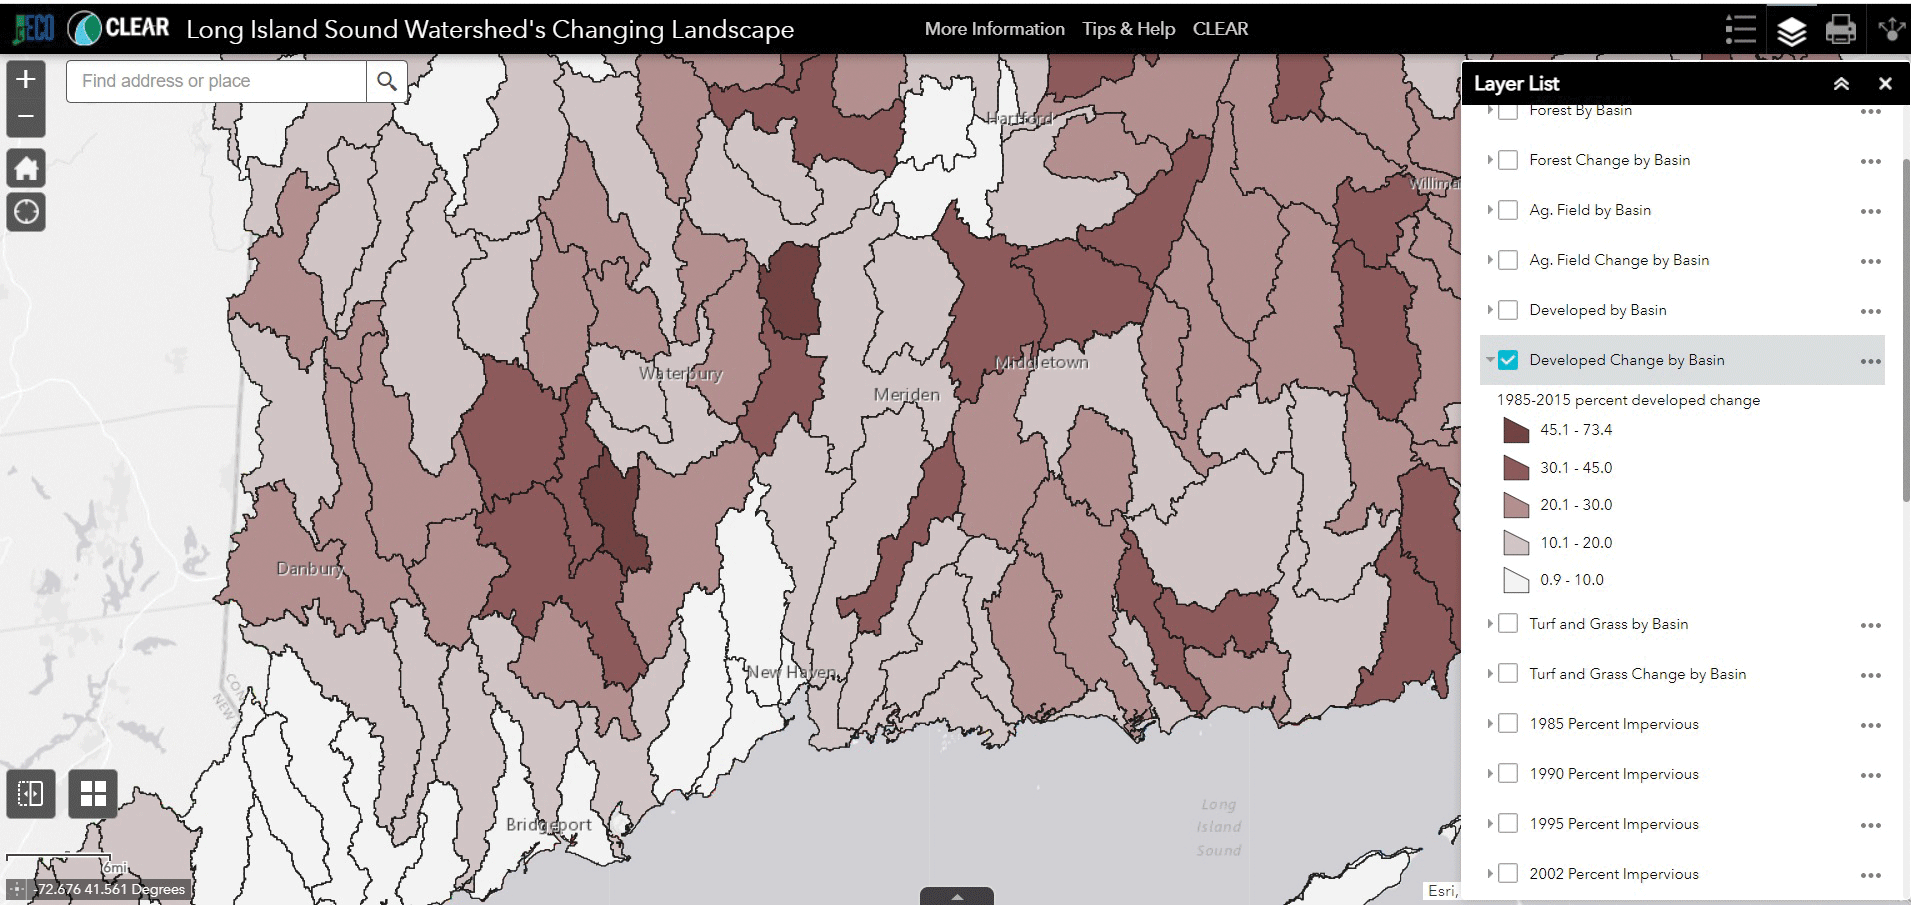 Screen capture of web page showing developed change by basin in Long Island Sound.